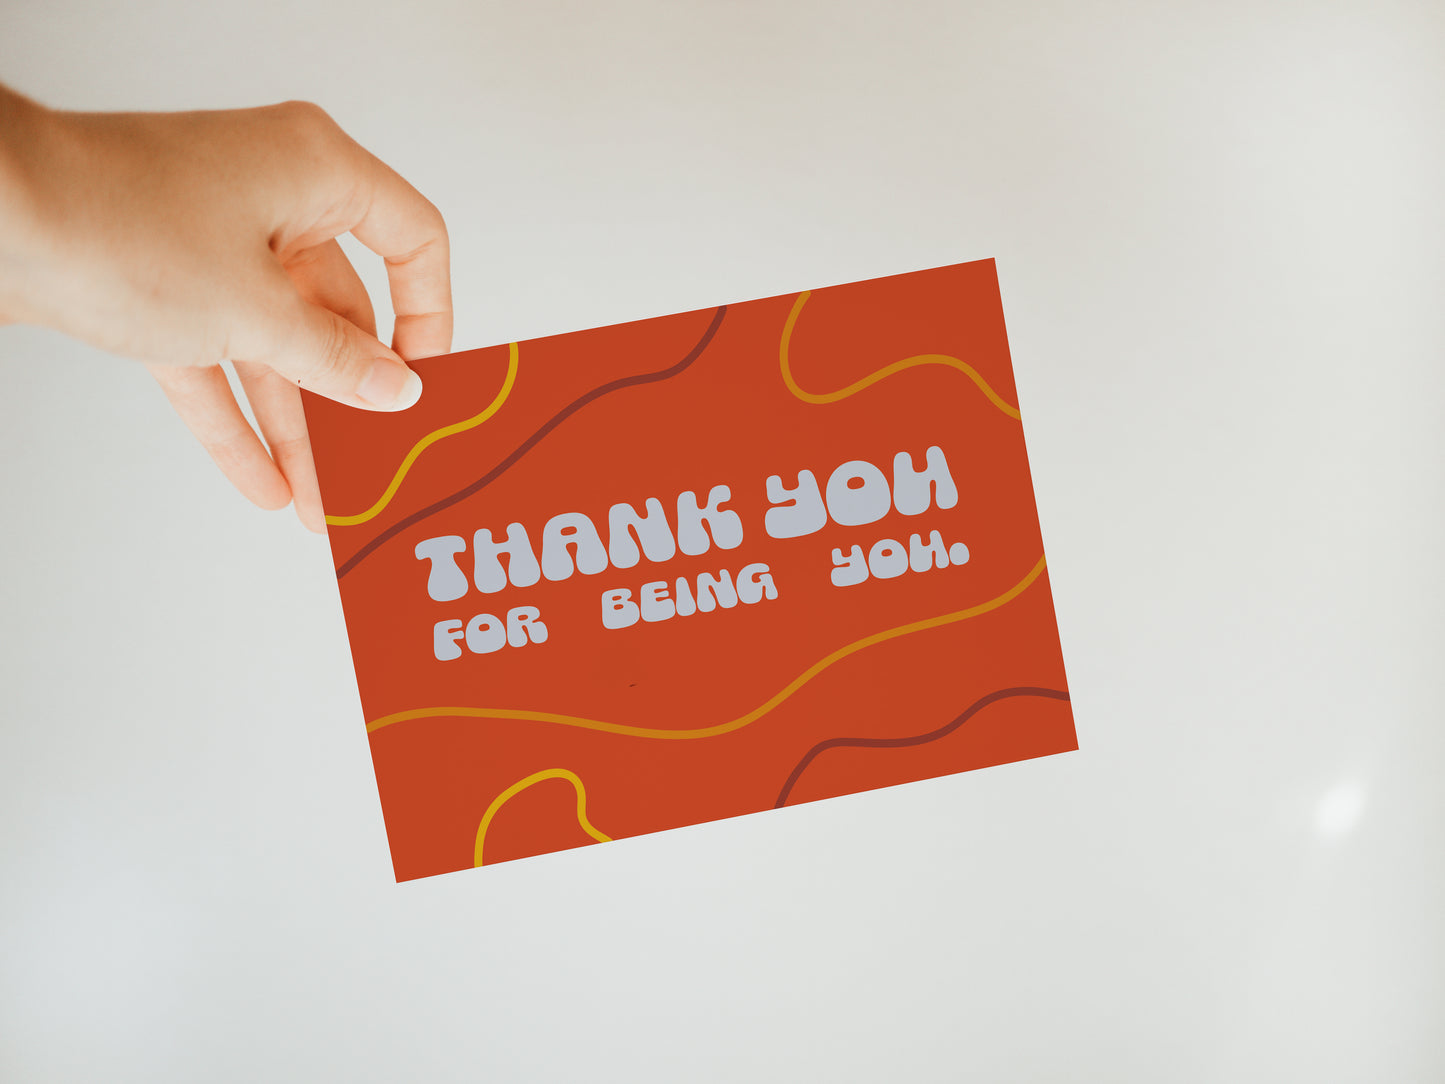 hand holding a red greeting card that says "thank you for being you" in white bubble letters with a simple wavy line design in the background in muted yellows and dark reds